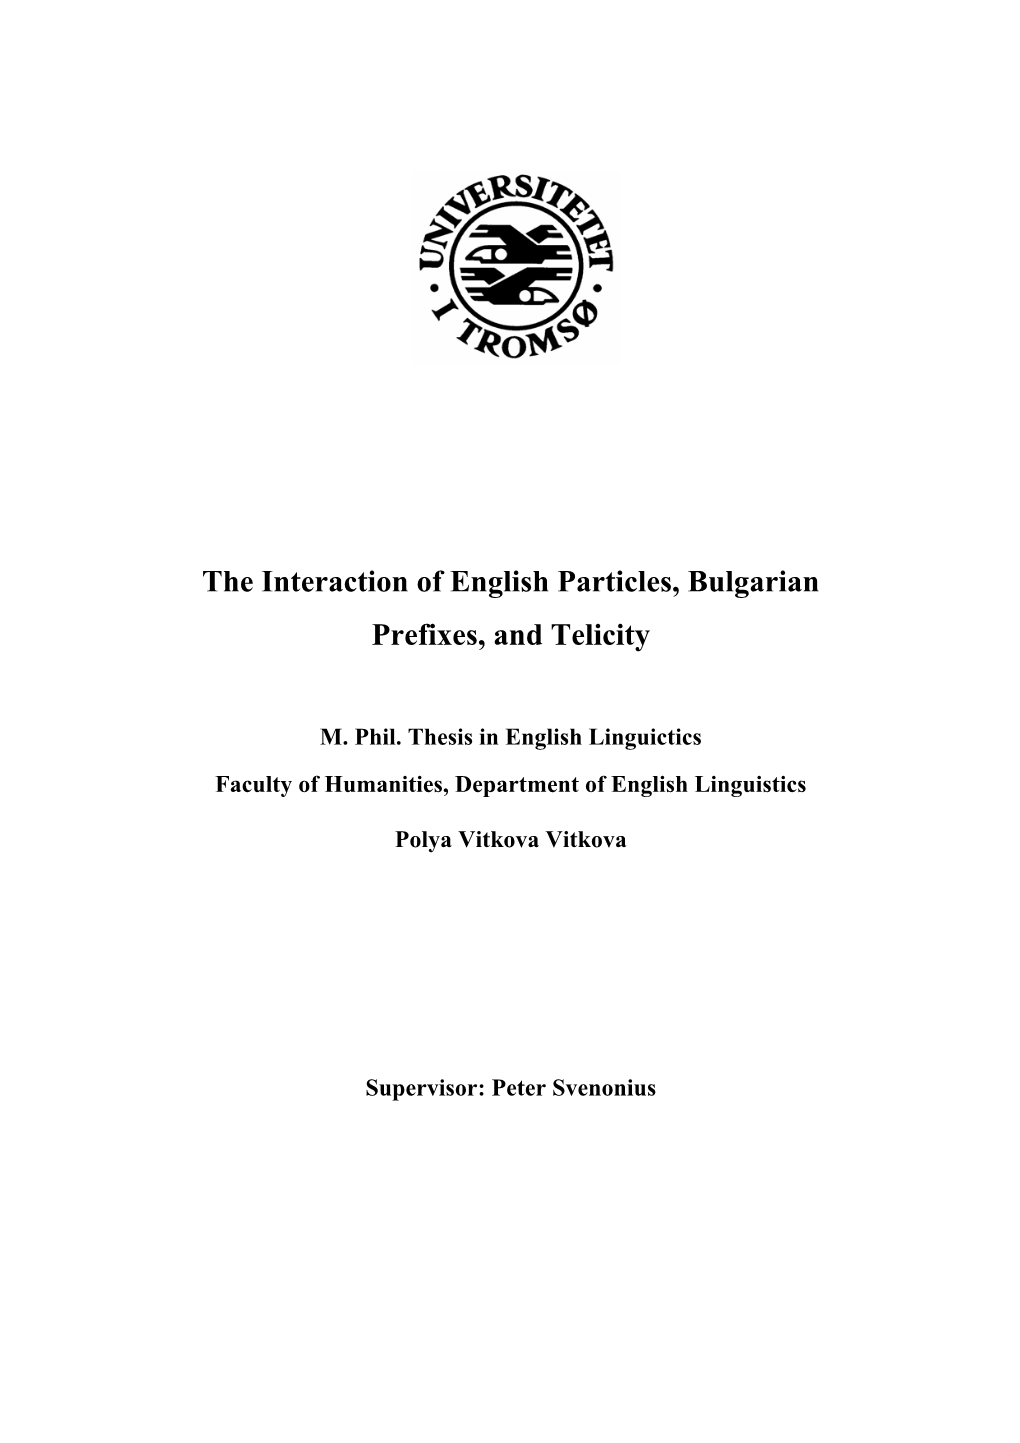 The Interaction of English Particles, Bulgarian Prefixes, and Telicity